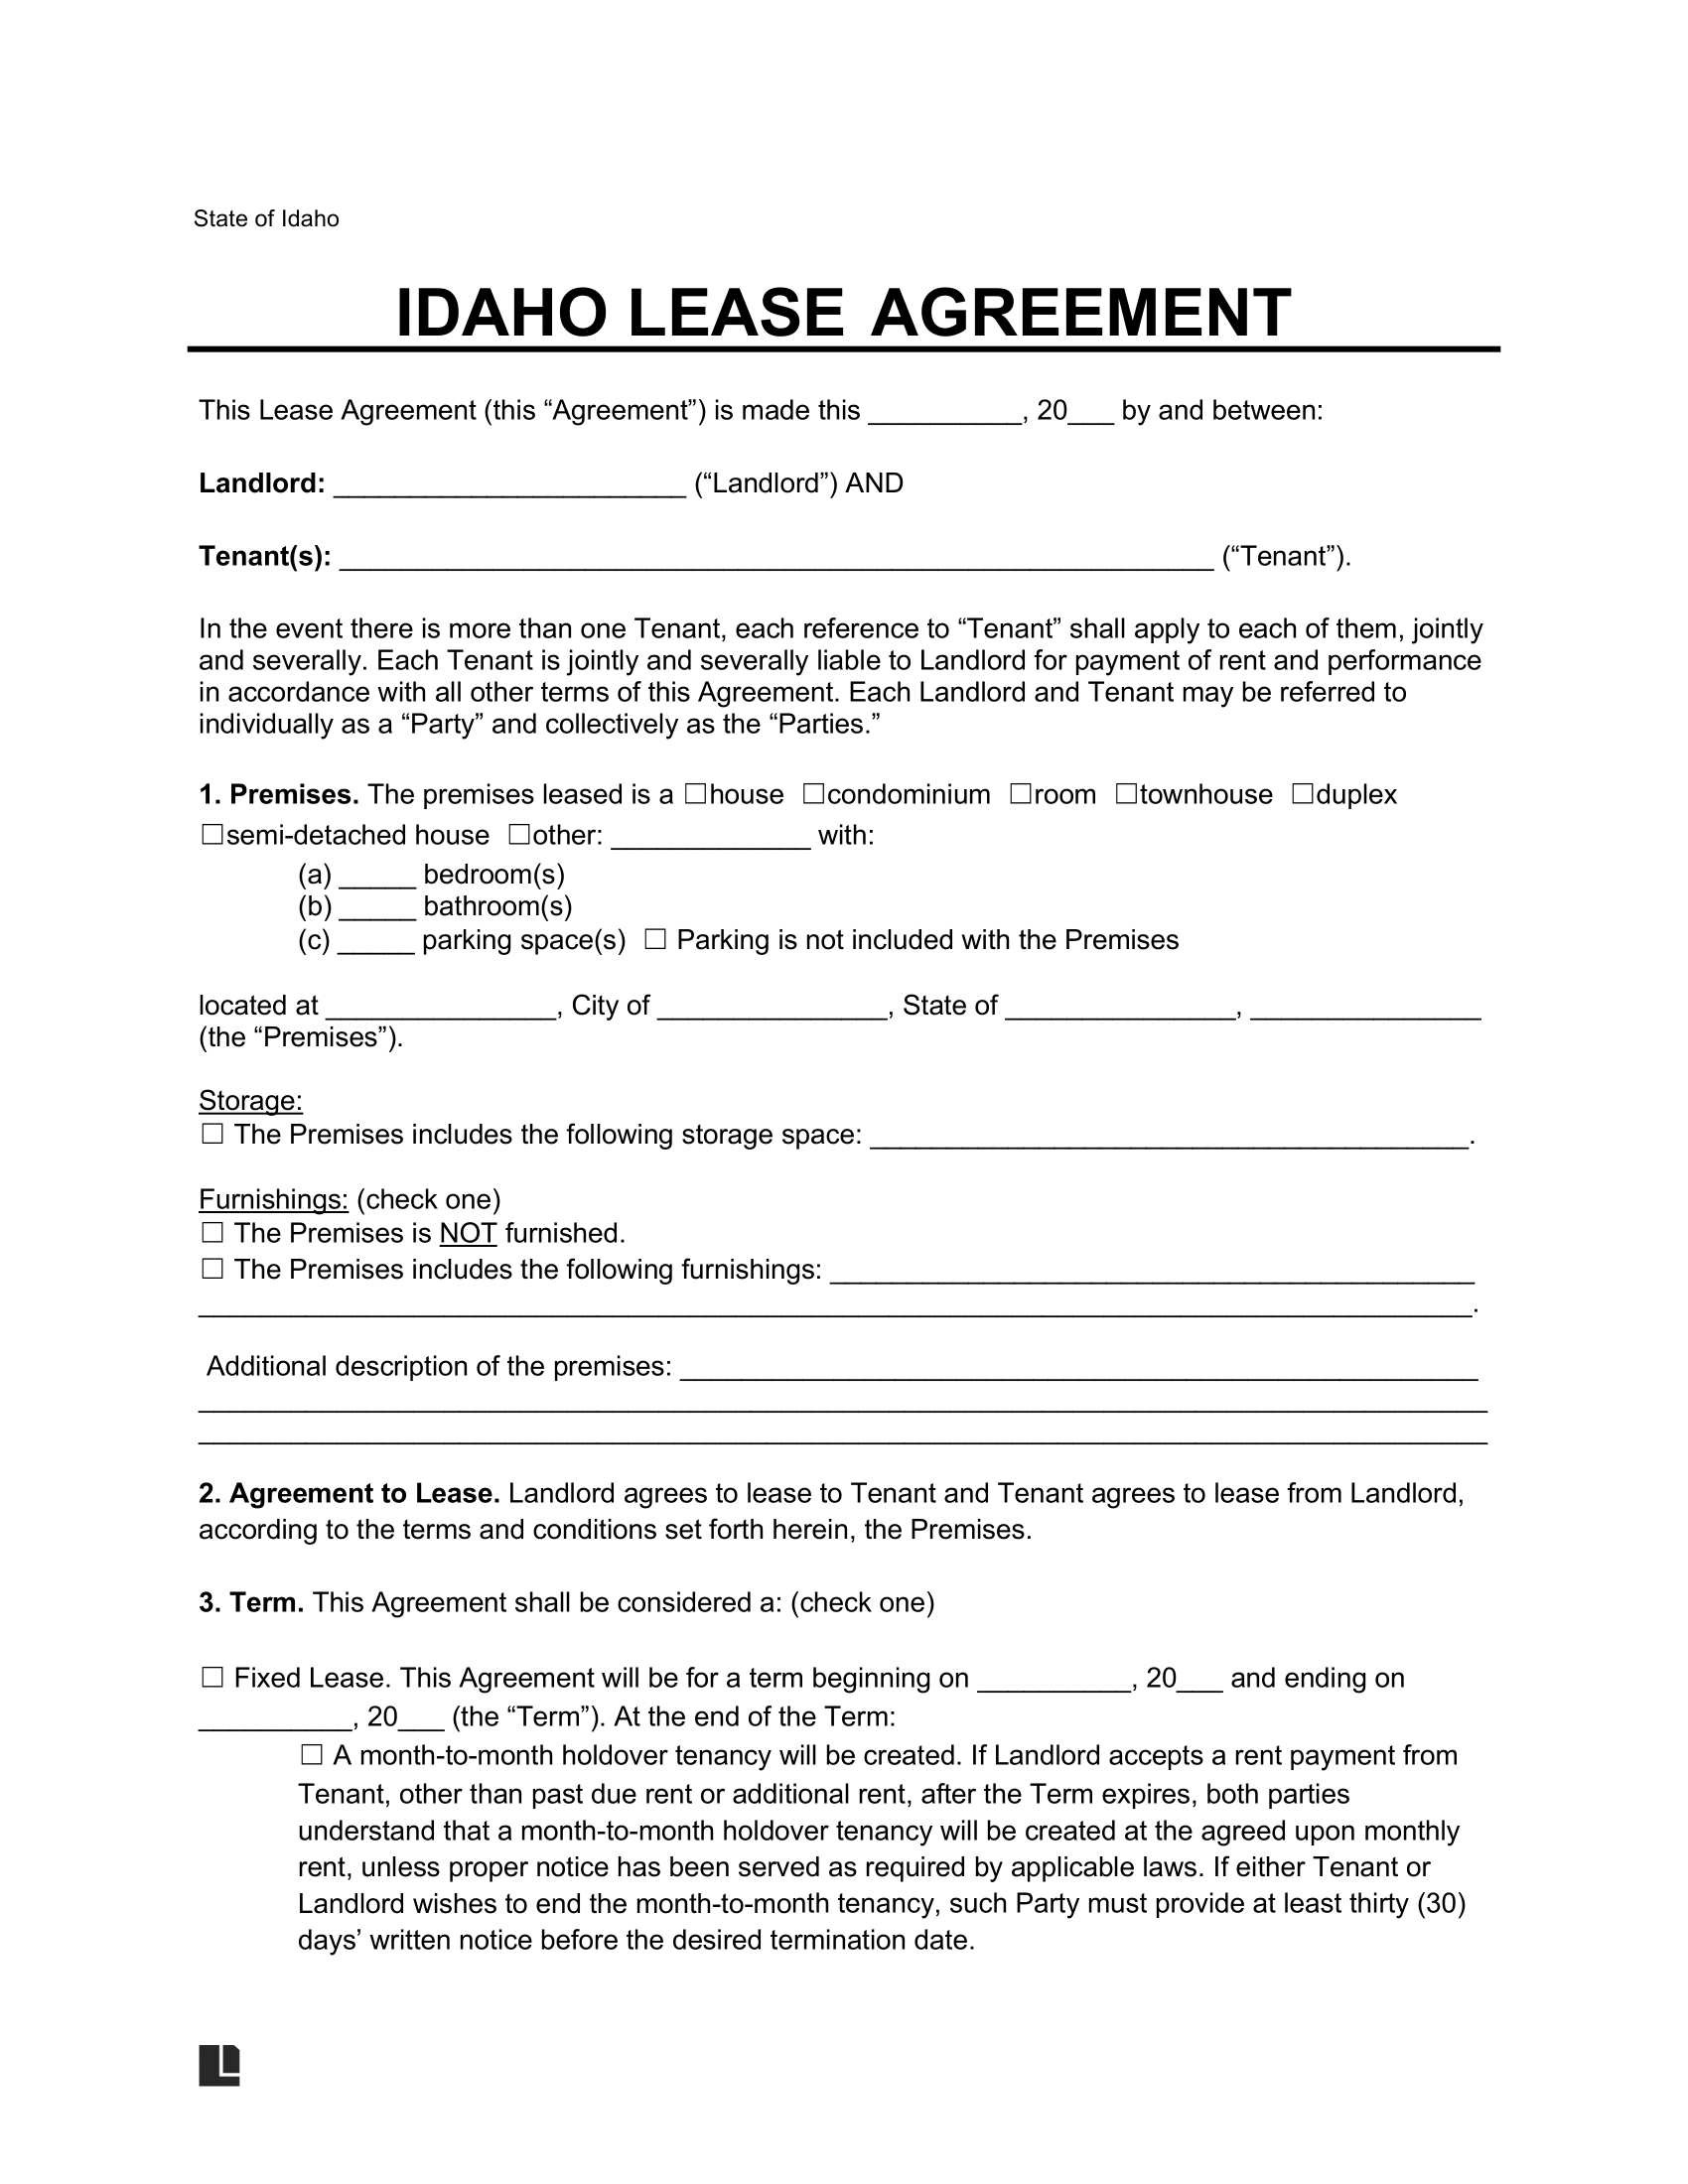 idaho residential lease agreement